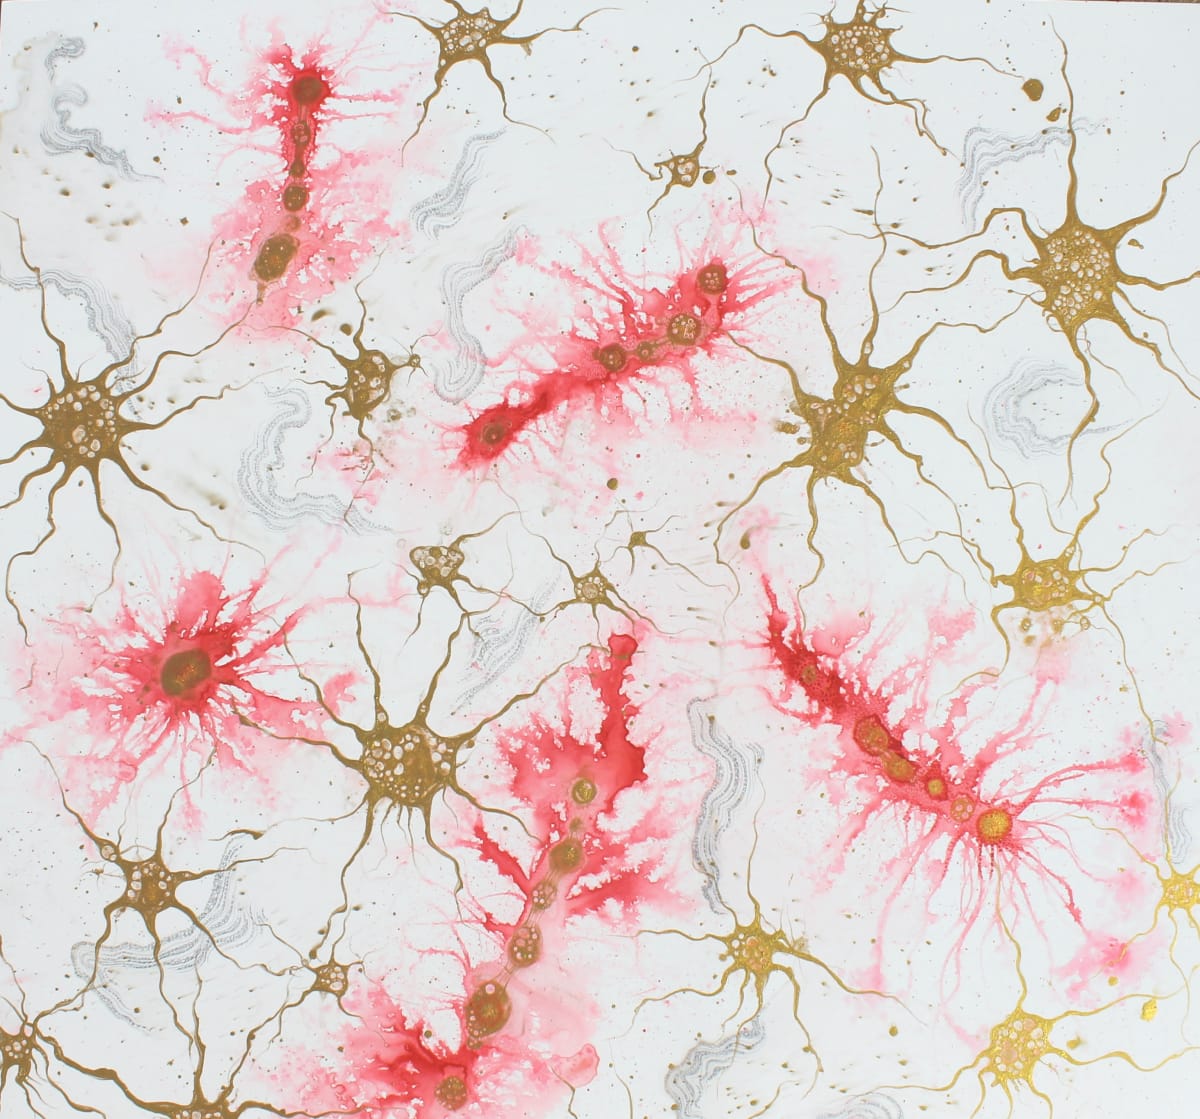 (Alternate piece) Oh, Astrocyte Love by A. D. Herzel  Image: Created and Exhibited in the Artist Research Partnership with the Corilian School of Medicine.  I was paired with a neuroscience researcher studying brain trauma. 